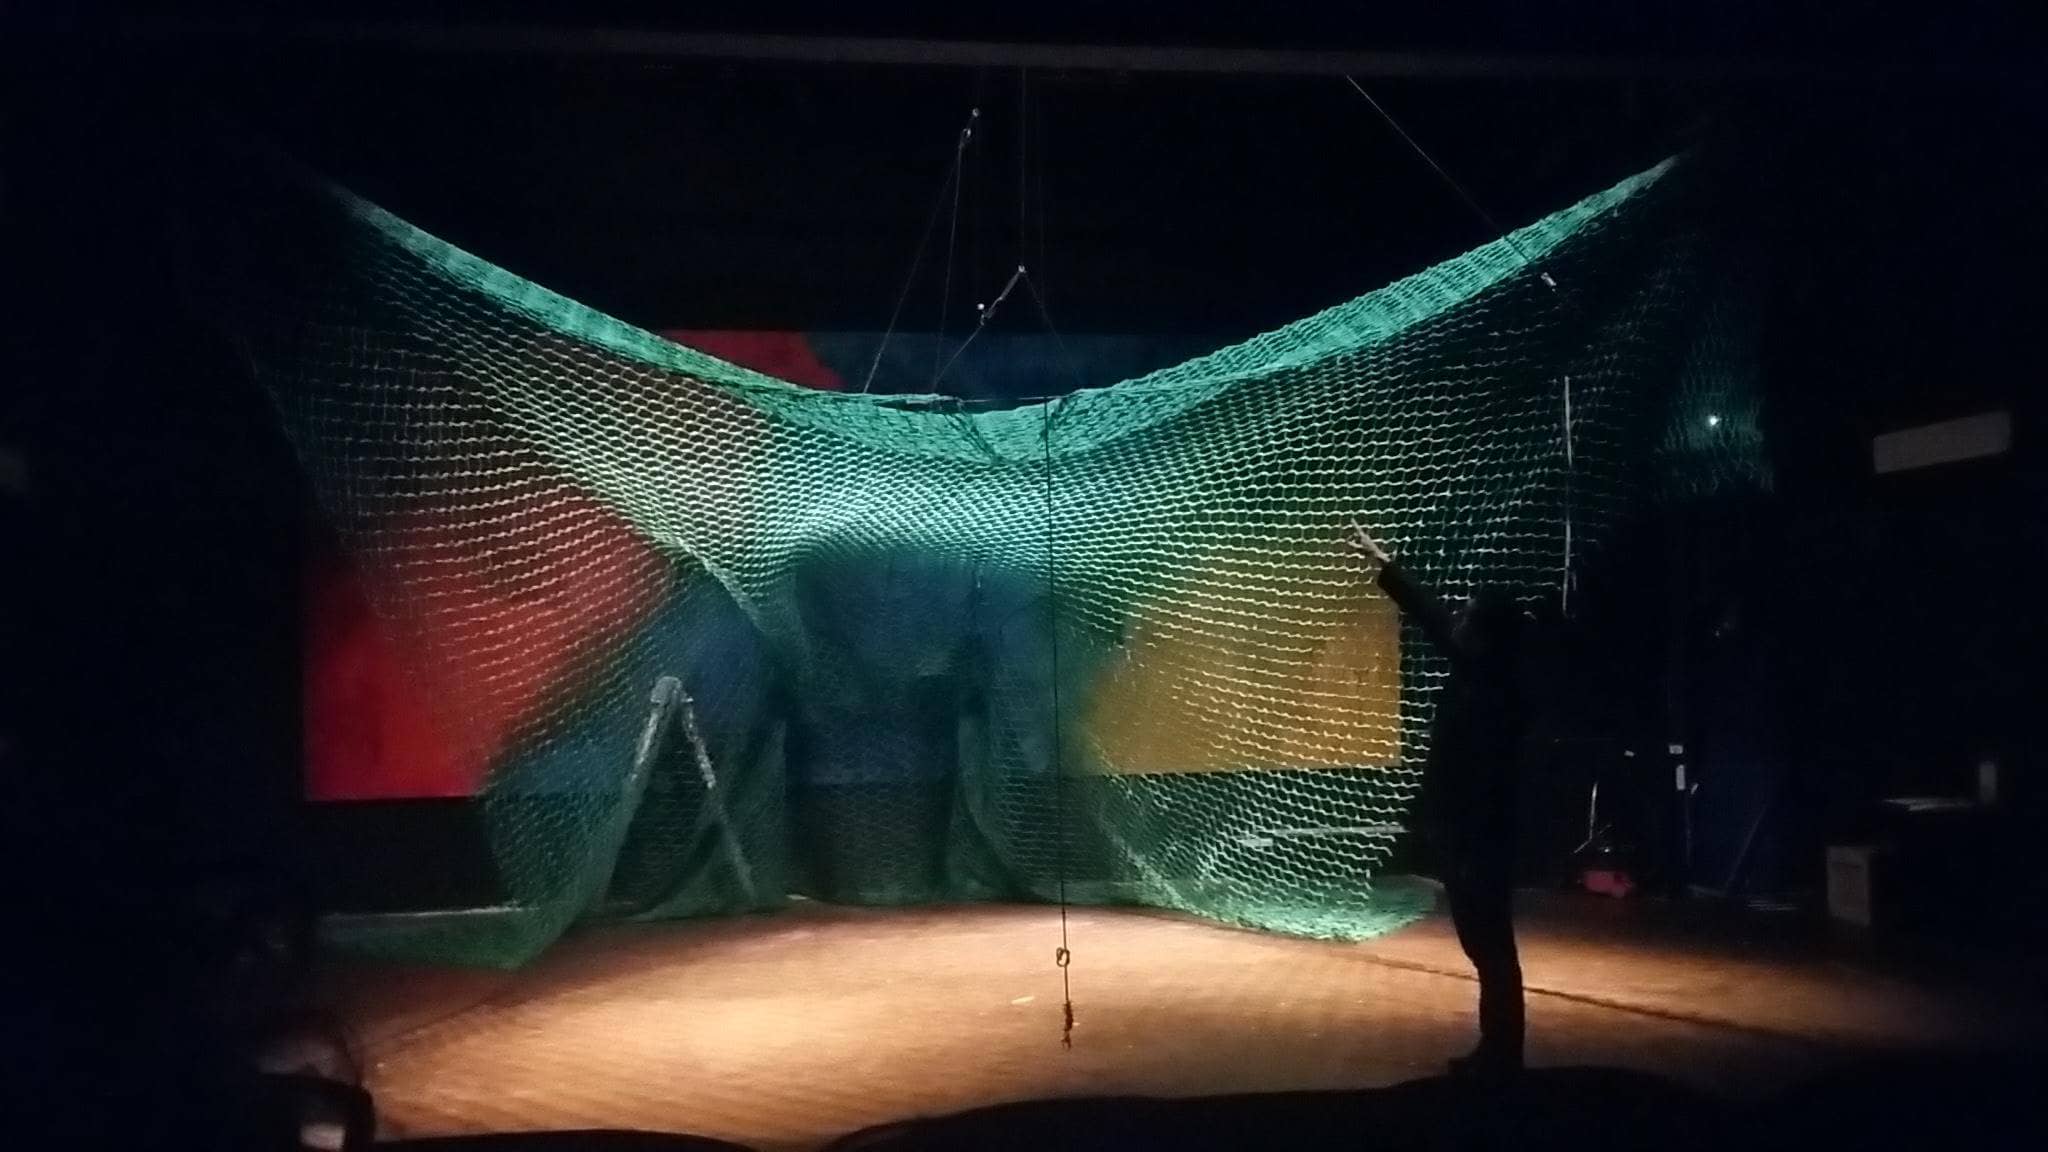 Net used as stage prop